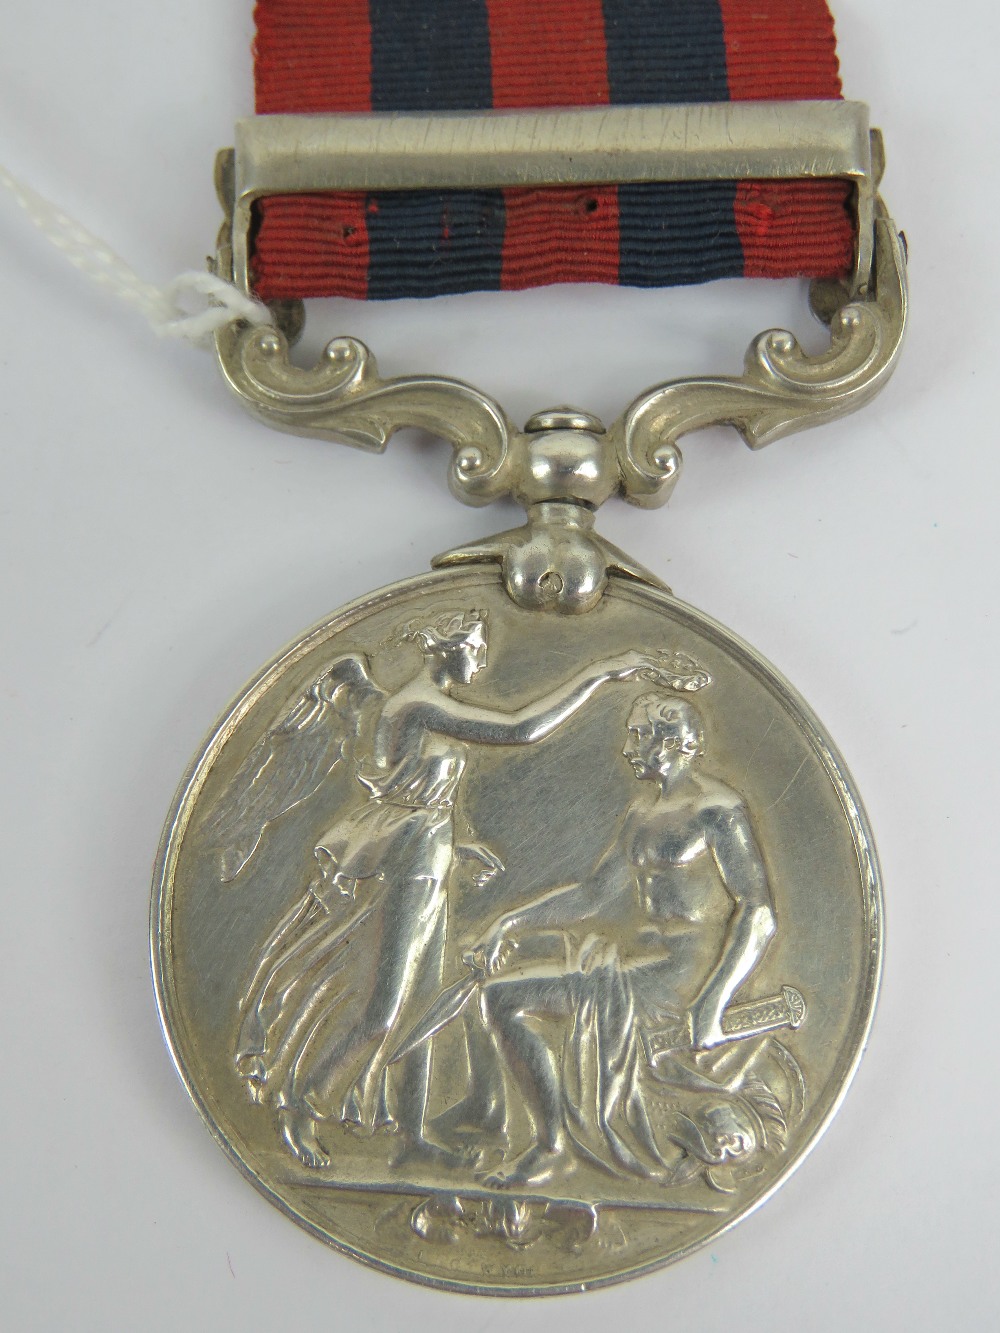 A Queen Victoria medal with 1889-92 Burma clasp, to 1065 Pte. - Image 2 of 5